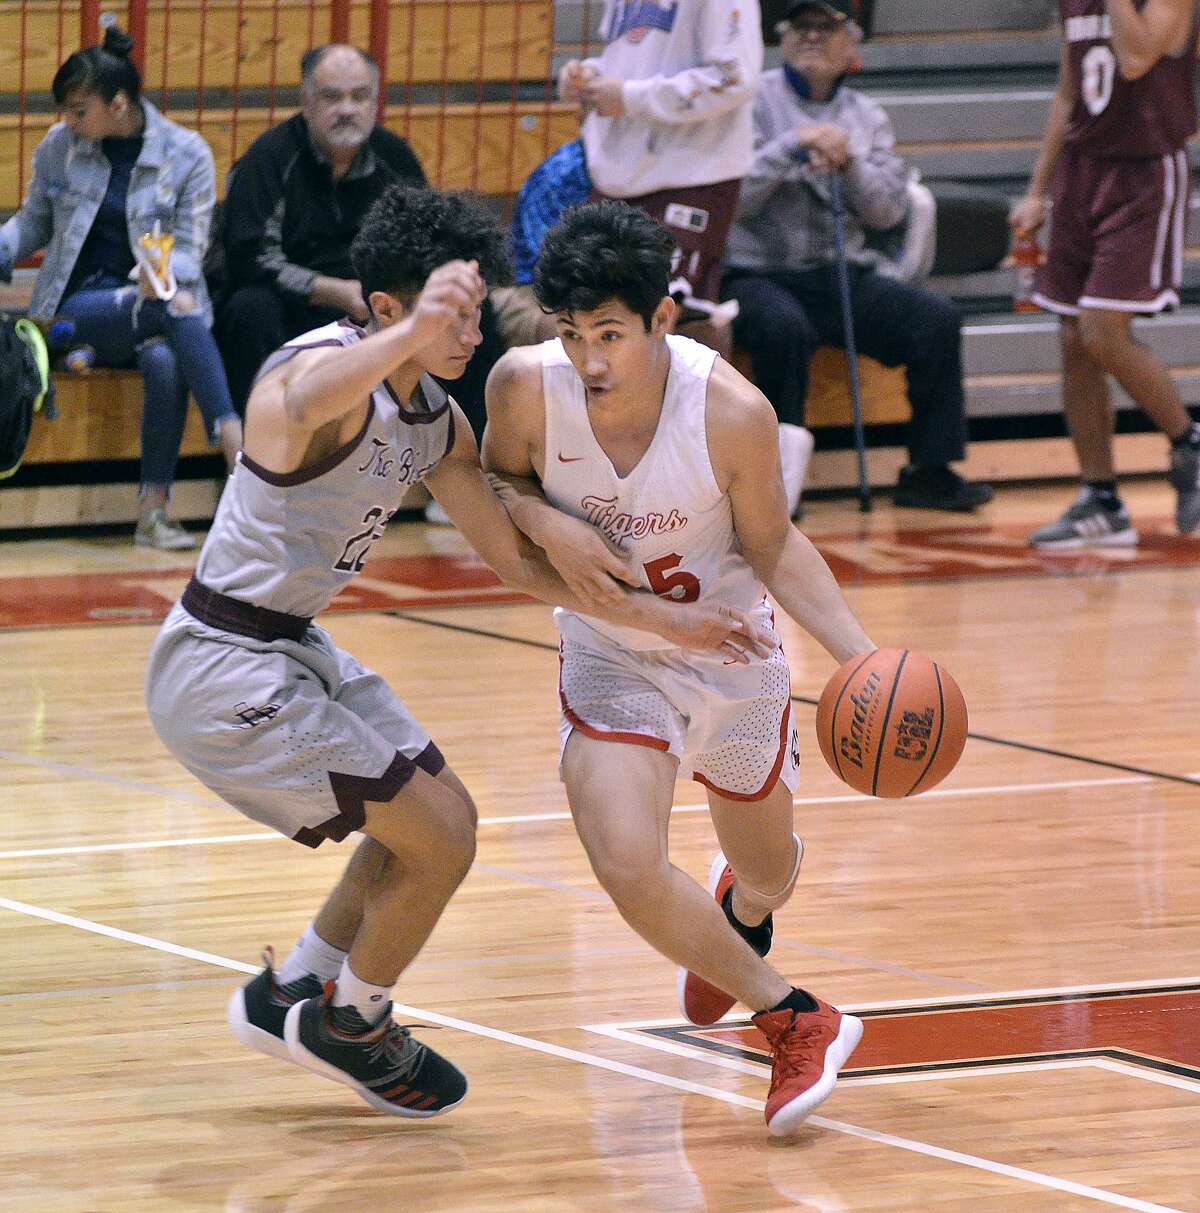 Nelson Vasquez scored 23 points in Martin’s win Tuesday.